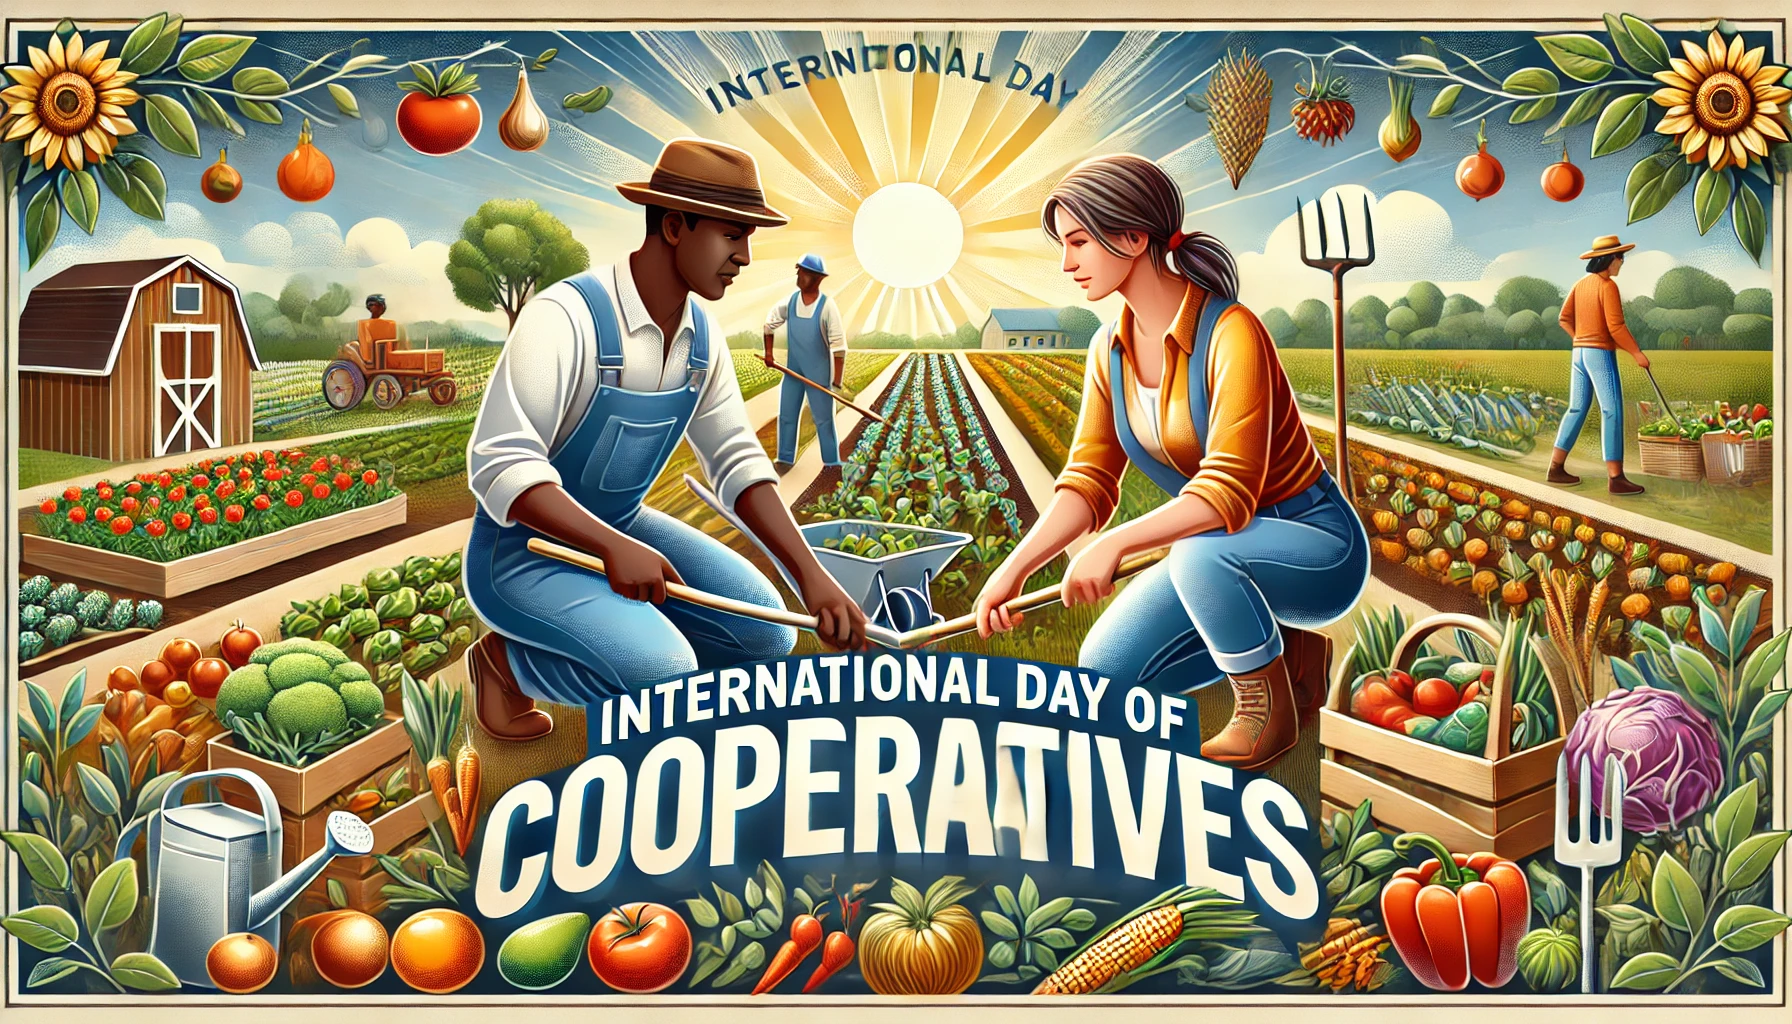 International Day of Cooperatives